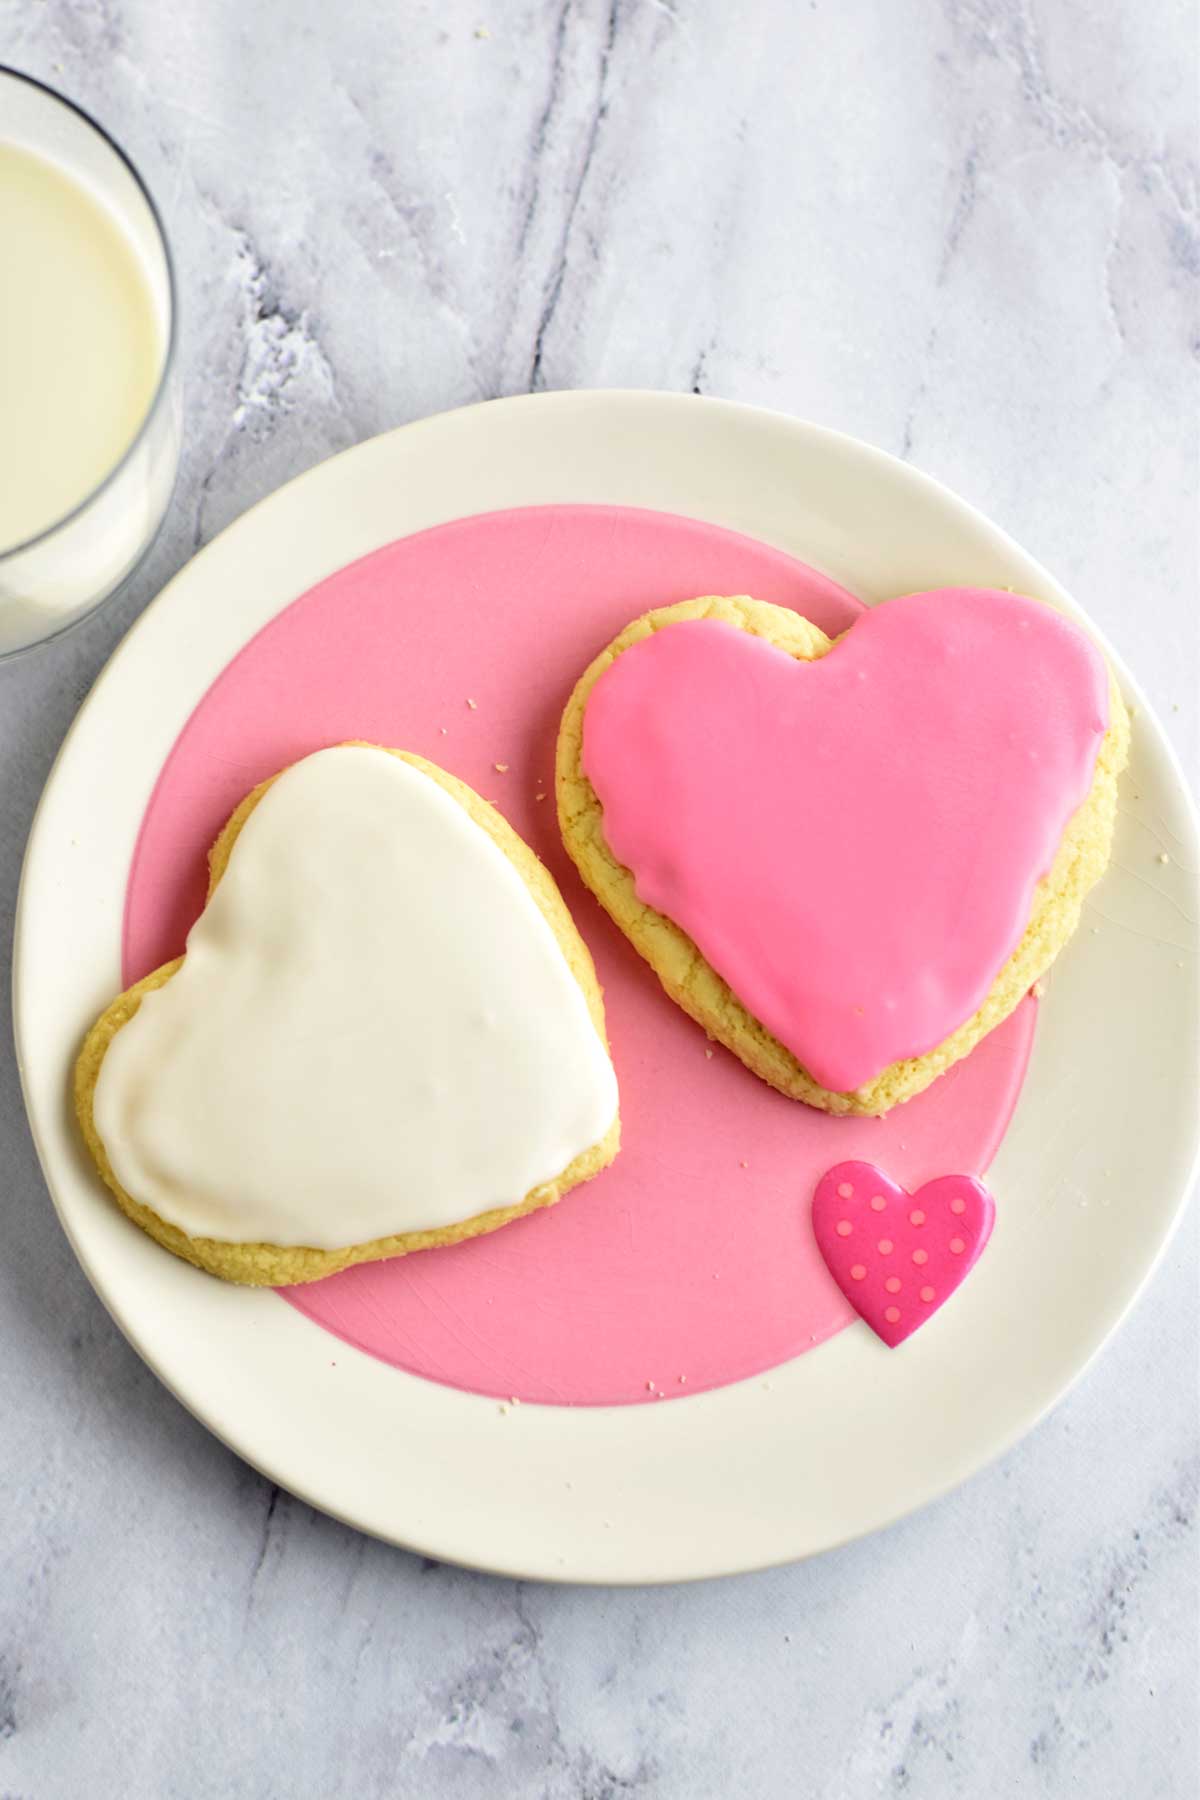 Two heart-shaped gluten free frosted sugar cookies on a pink and white plate.